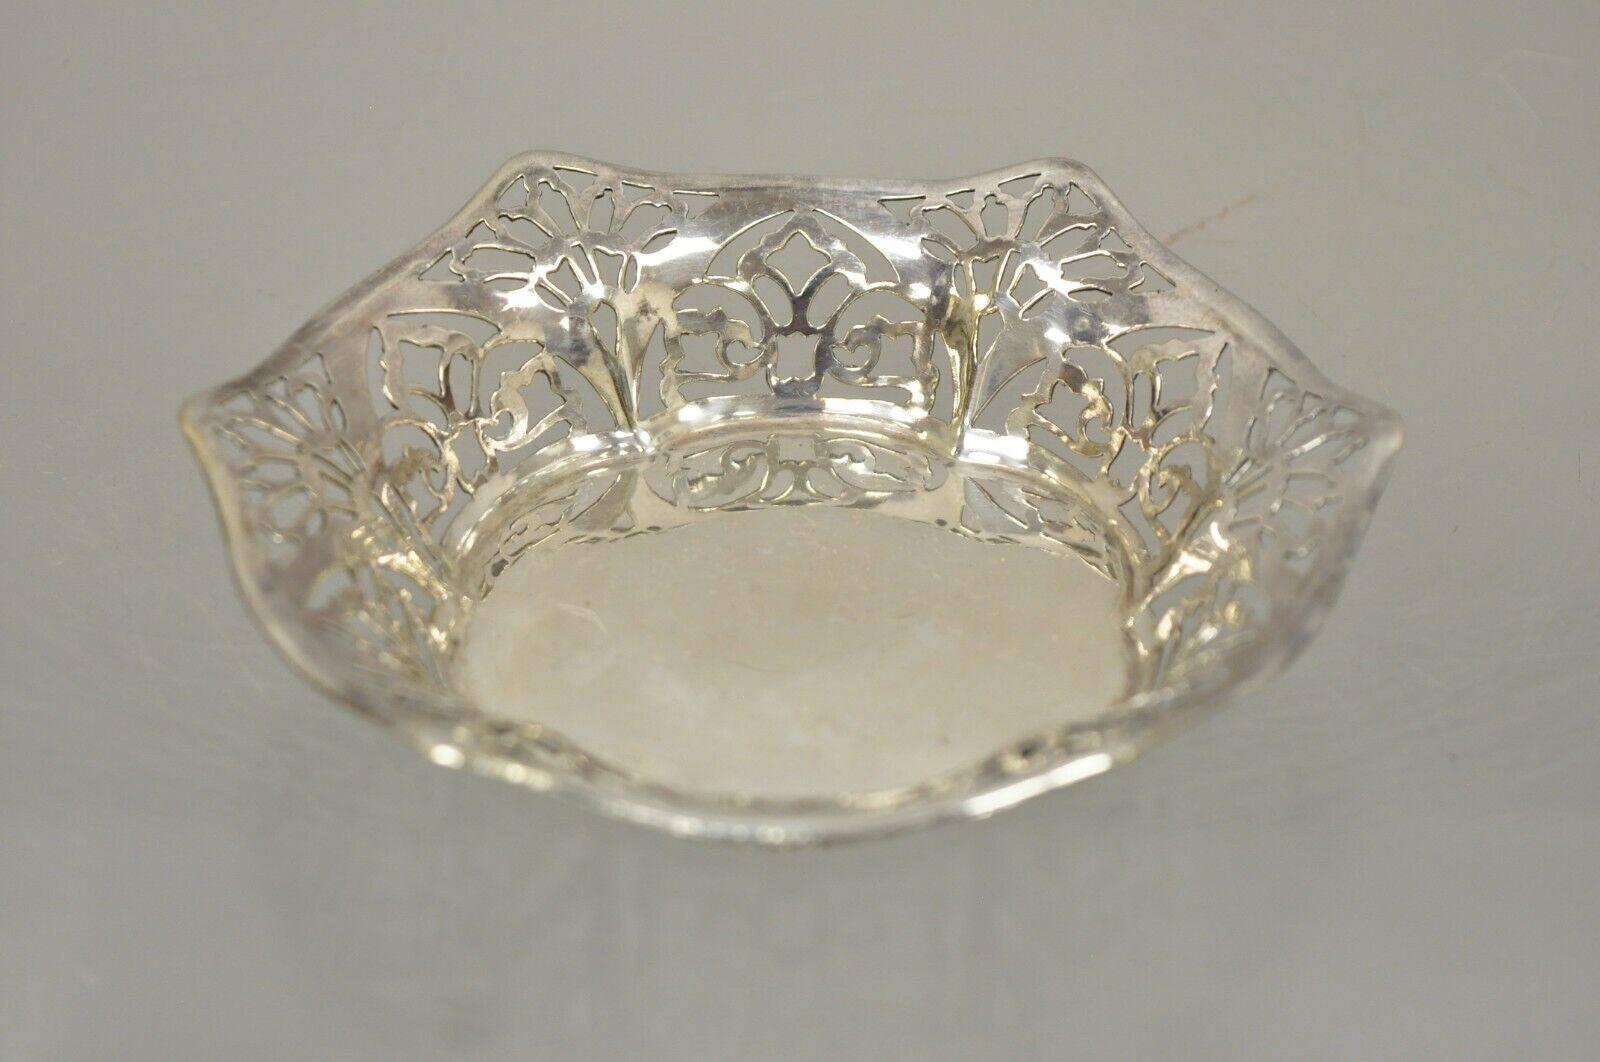 Vintage TBB England Silver Plate Epns Small Floral Pierced Trinket Dish Bowl For Sale 1